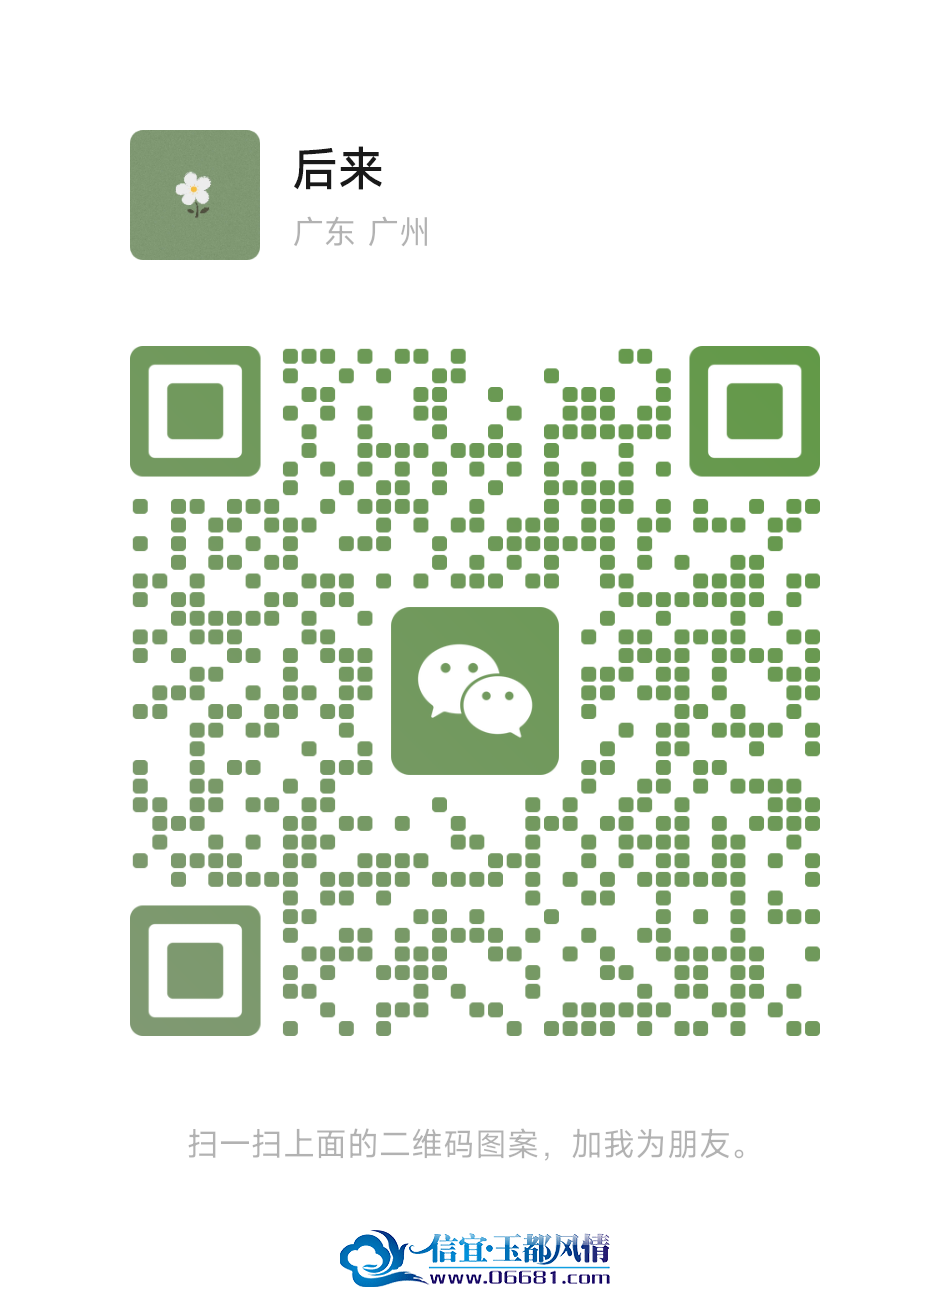 mmqrcode1690341909382.png